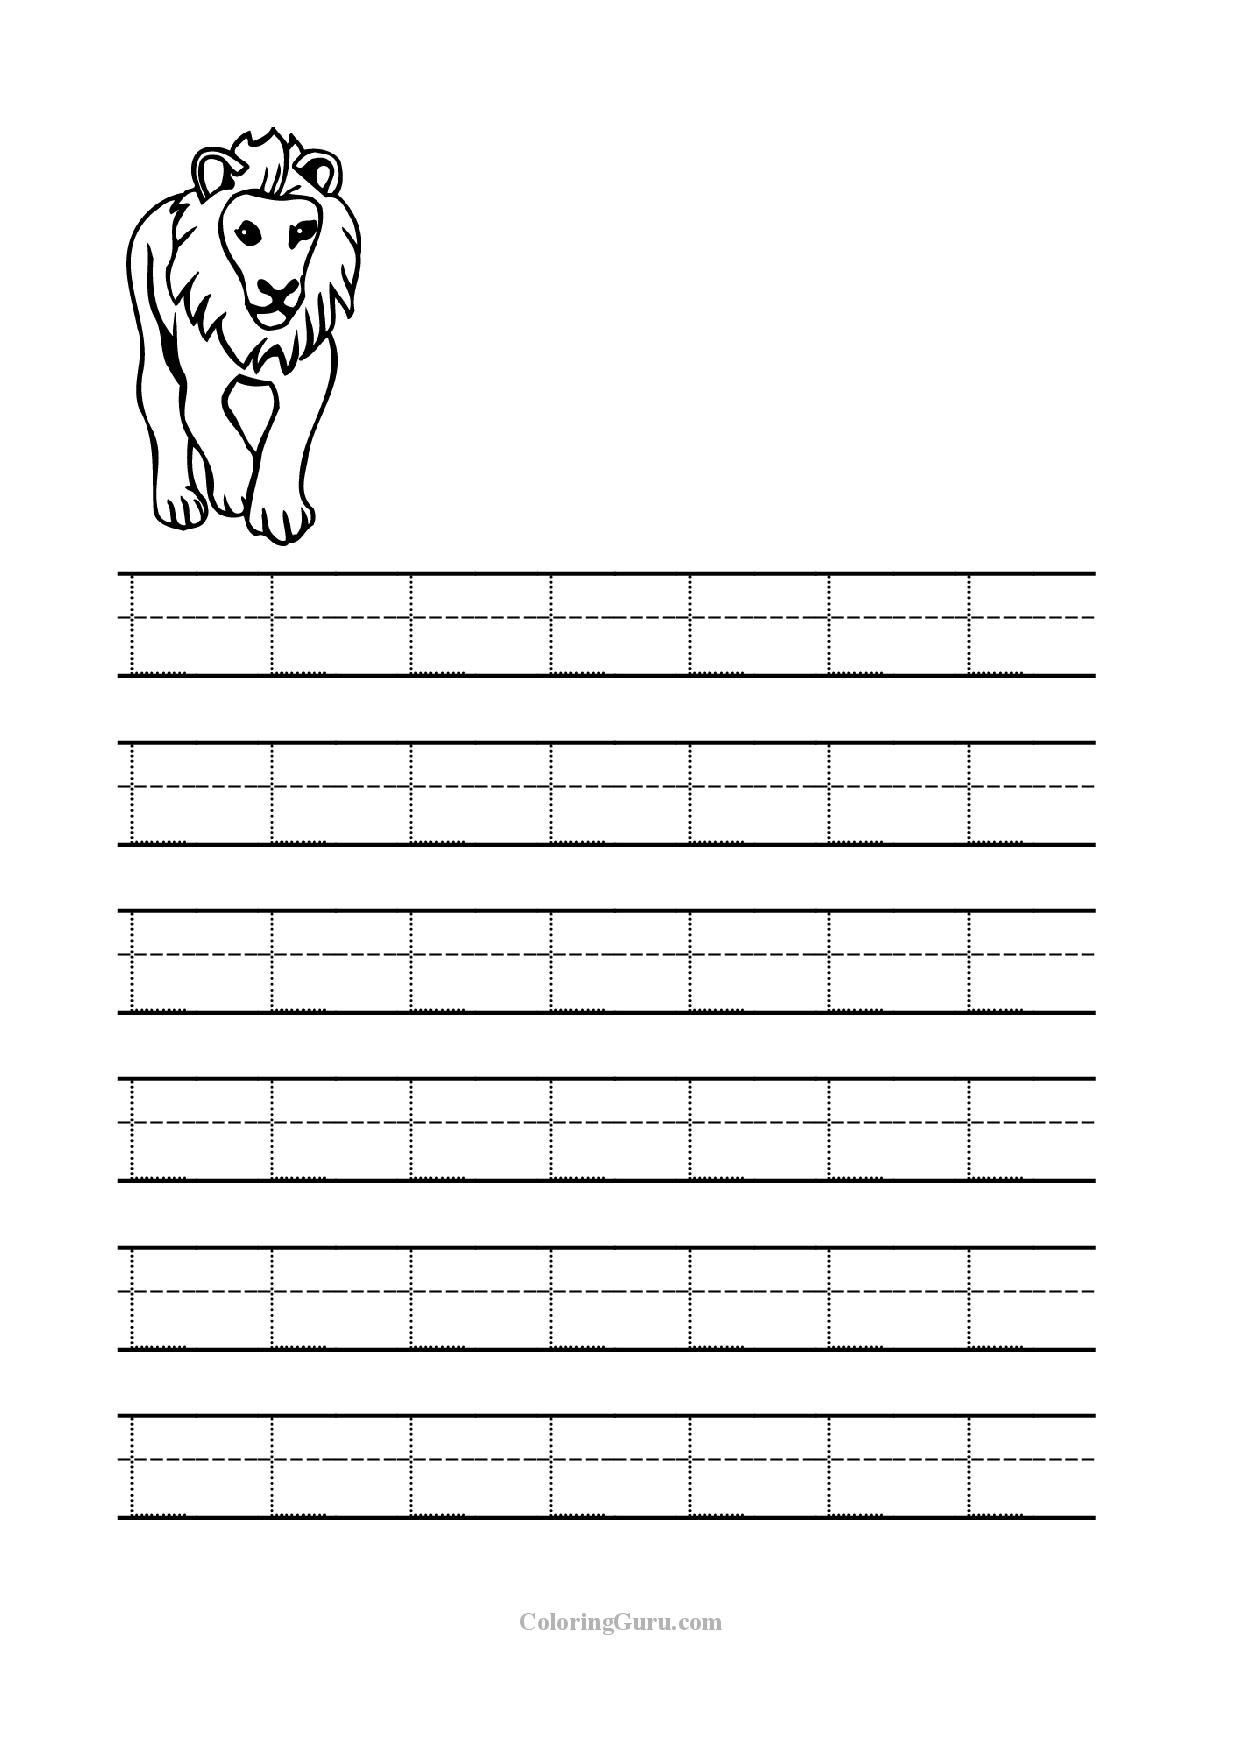 Free Printable Tracing Letter L Worksheets For Preschool throughout Letter L Tracing Preschool